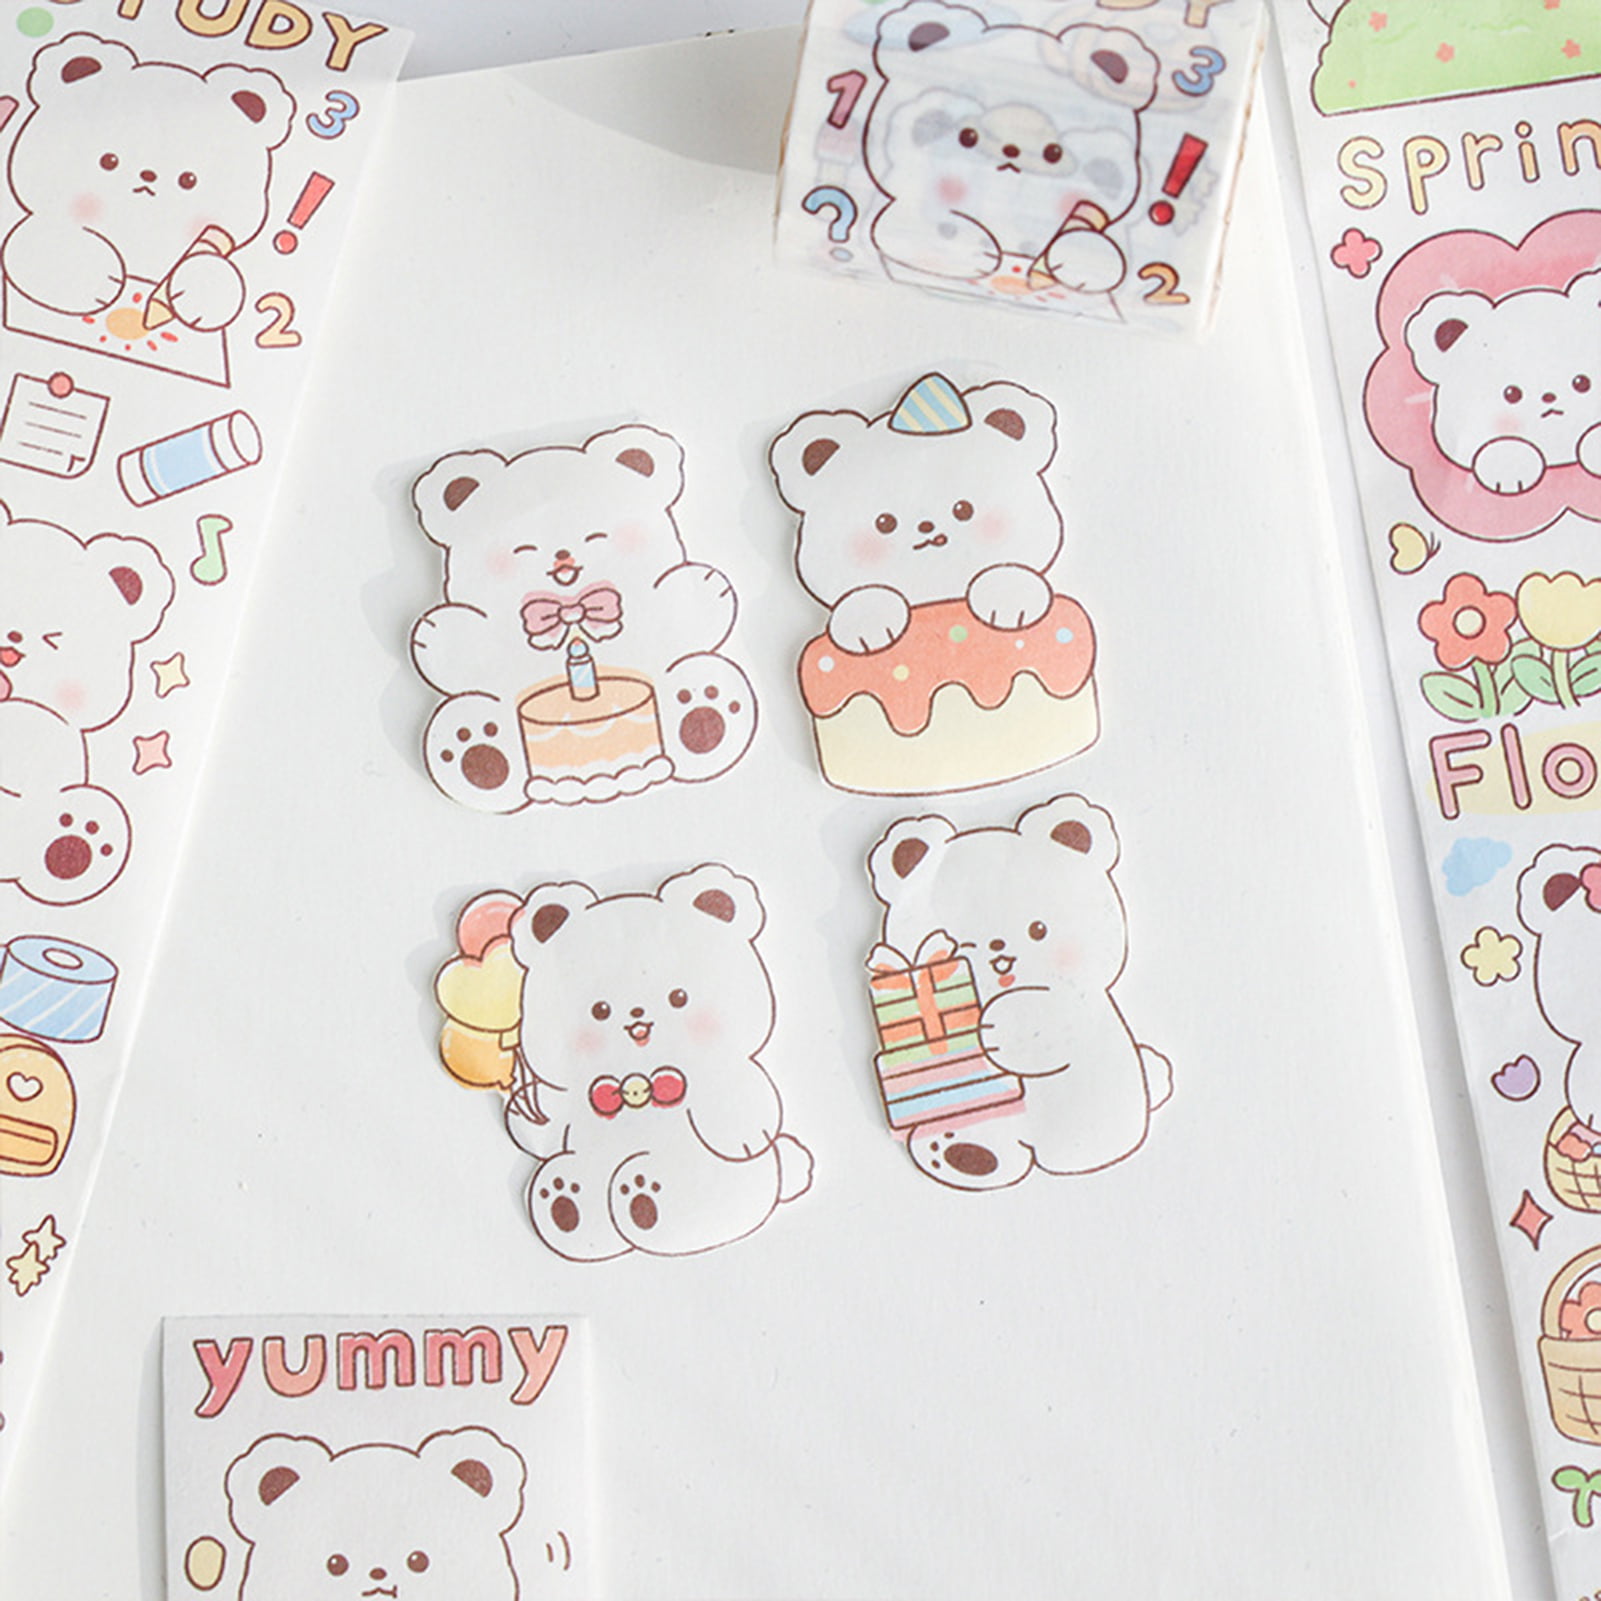 Hesroicy Reusable Sticker Tape Roll - Tearable Japan Paper with Cute Bear  Printing for Scrapbooking and Stationery Supplies 